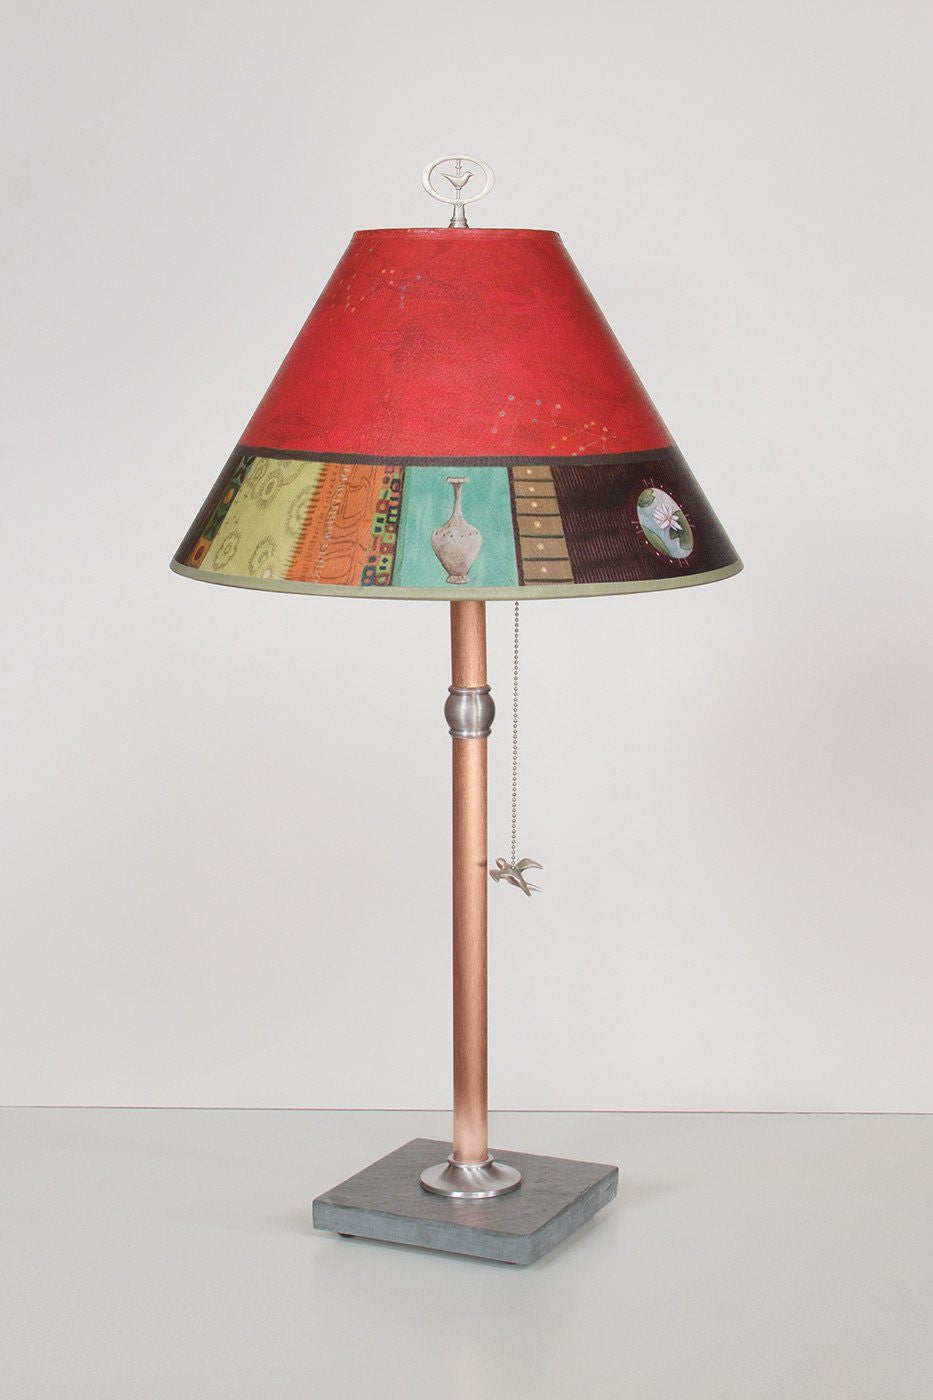 Copper Table Lamp with Medium Conical Shade in Red Match